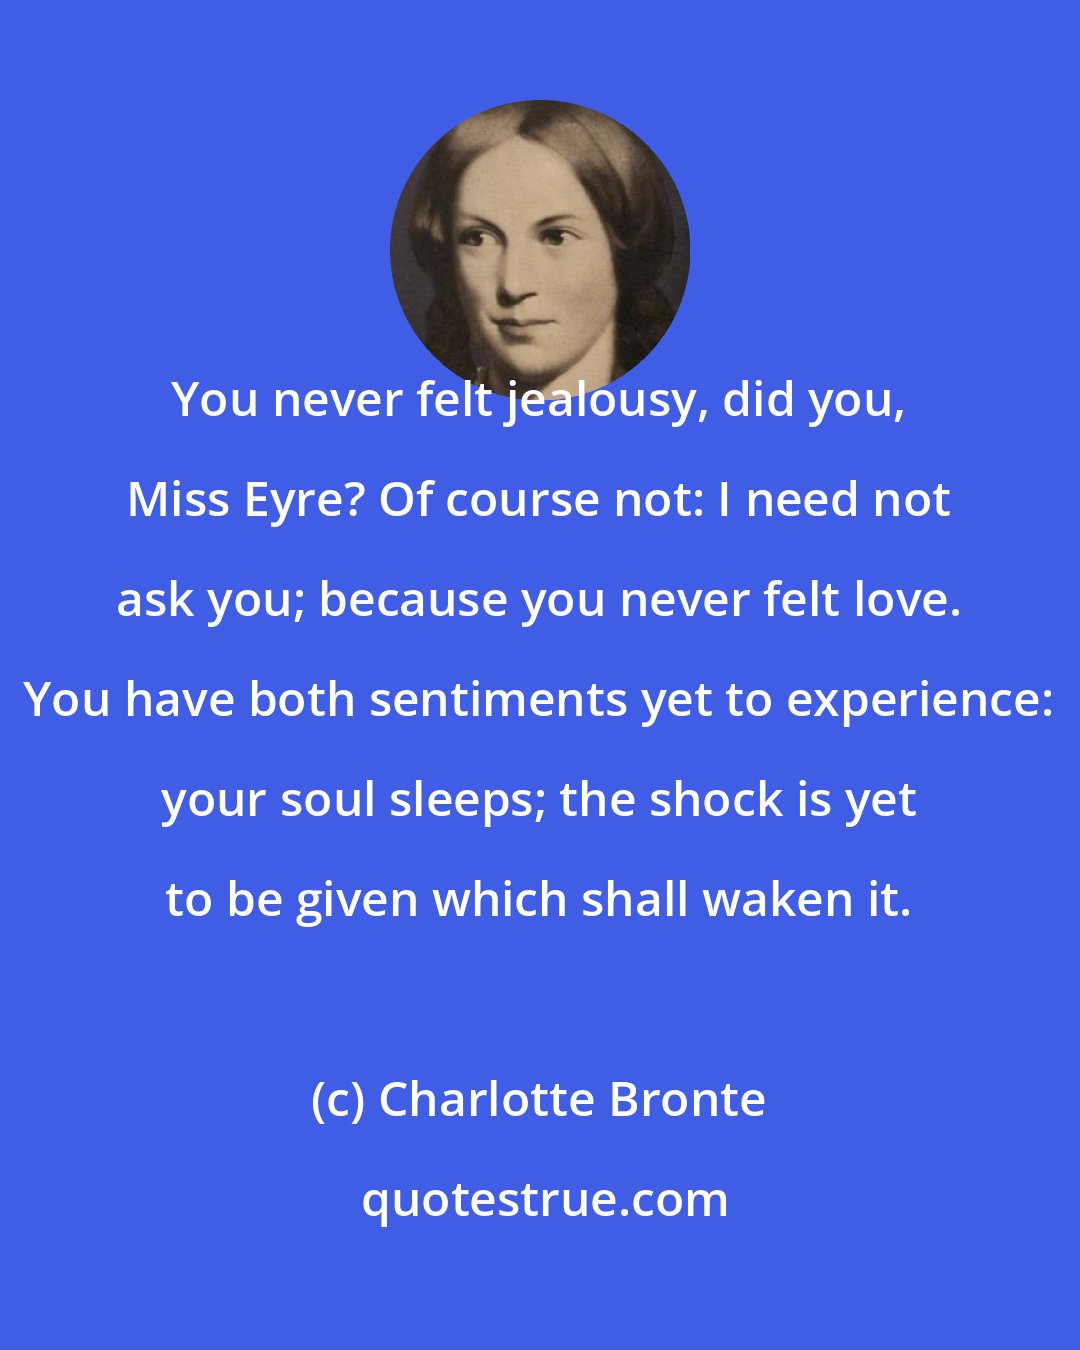 Charlotte Bronte: You never felt jealousy, did you, Miss Eyre? Of course not: I need not ask you; because you never felt love. You have both sentiments yet to experience: your soul sleeps; the shock is yet to be given which shall waken it.